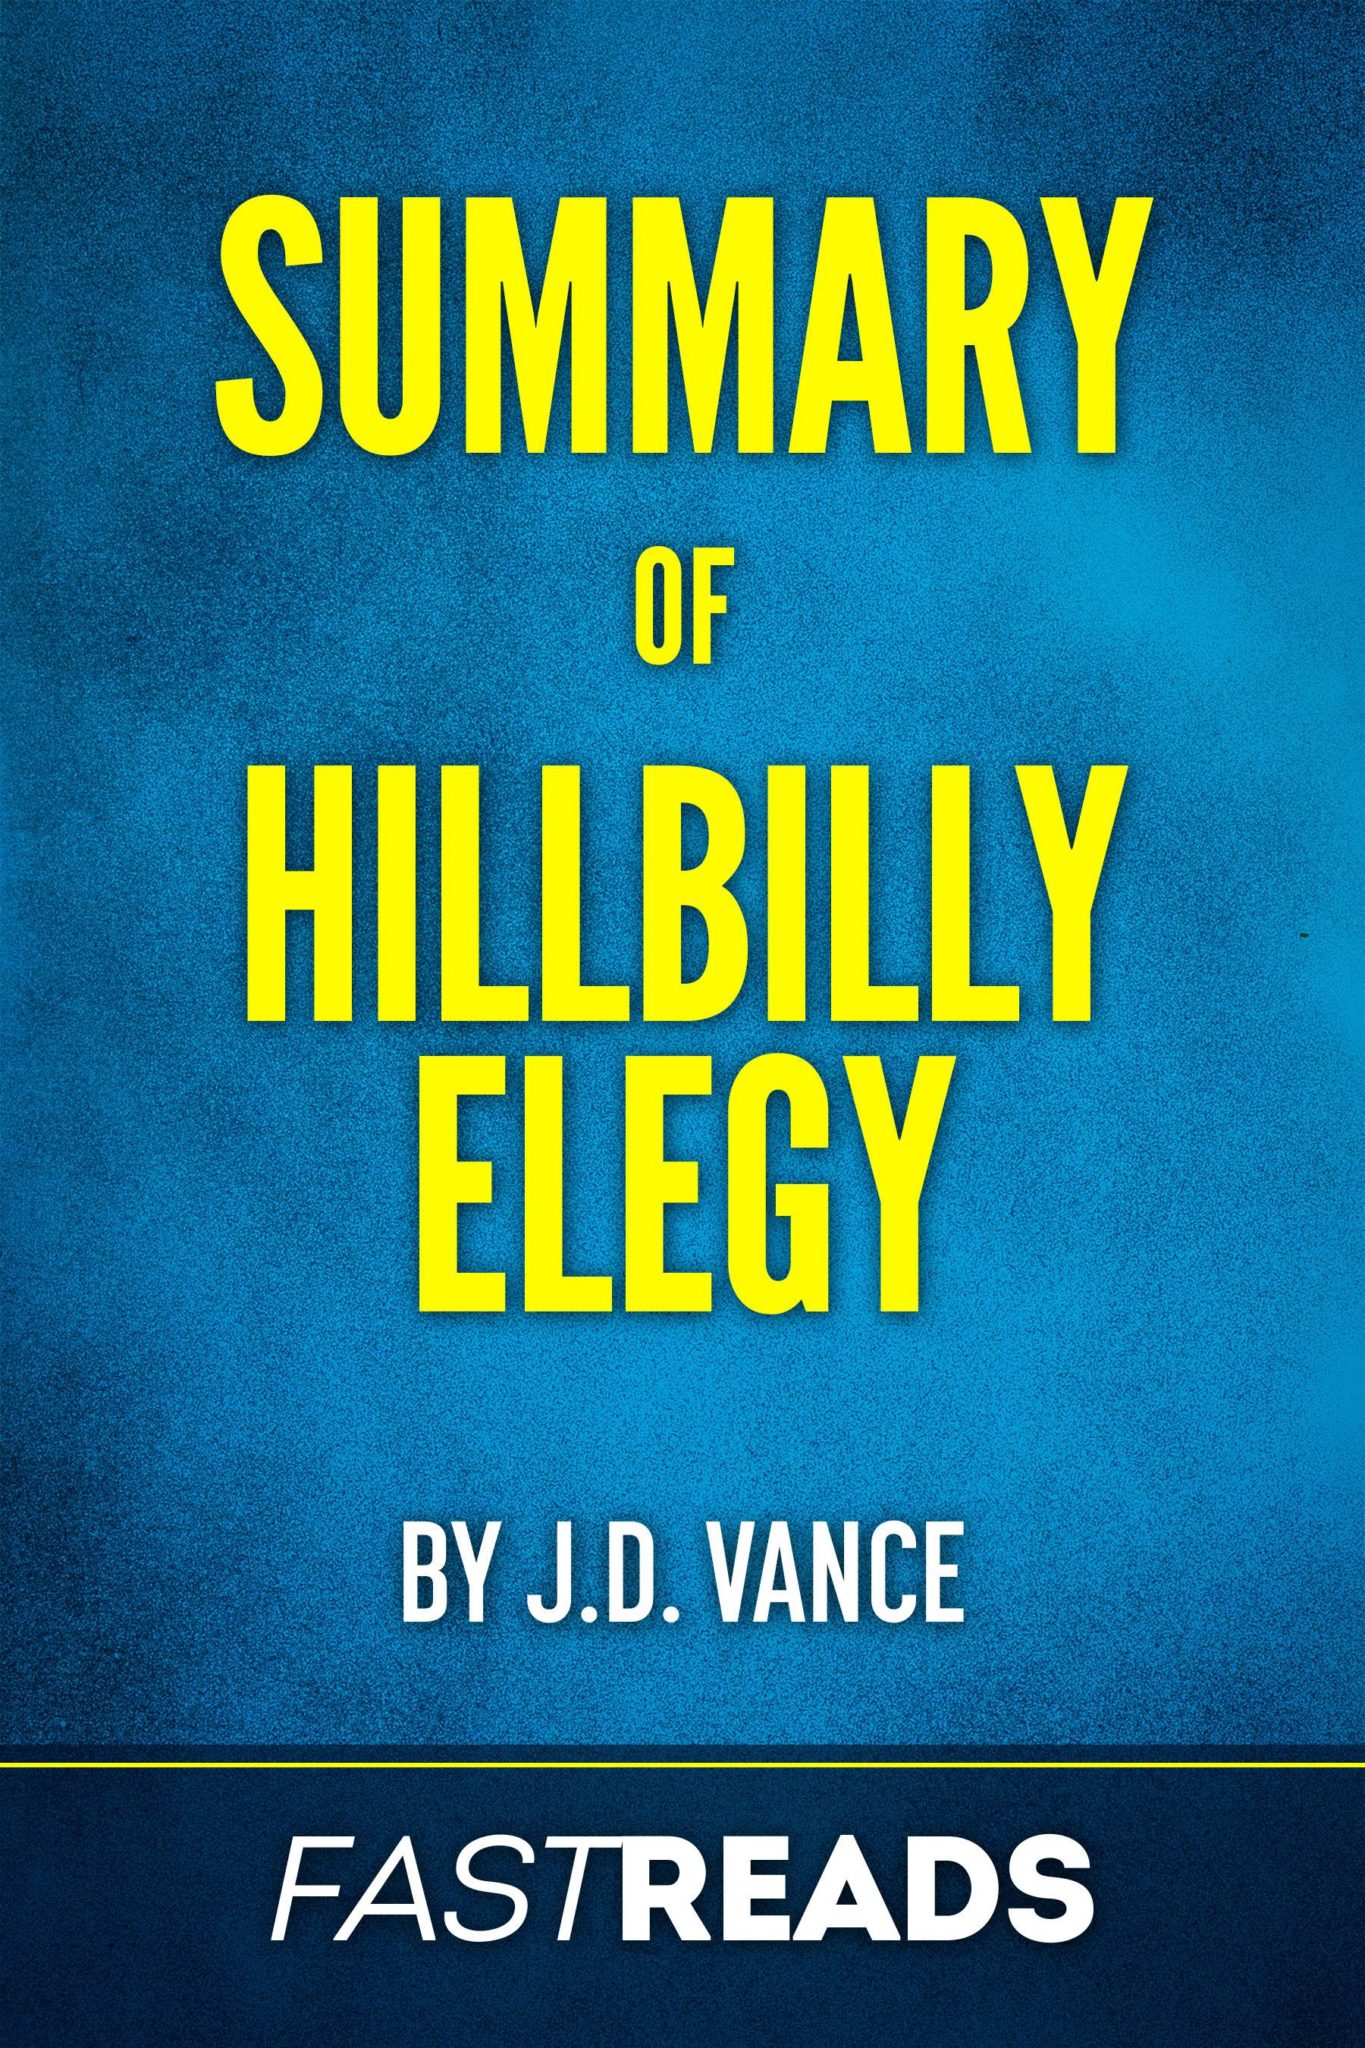 FREE: Summary of Hillbilly Elegy by J.D. Vance by FastReads